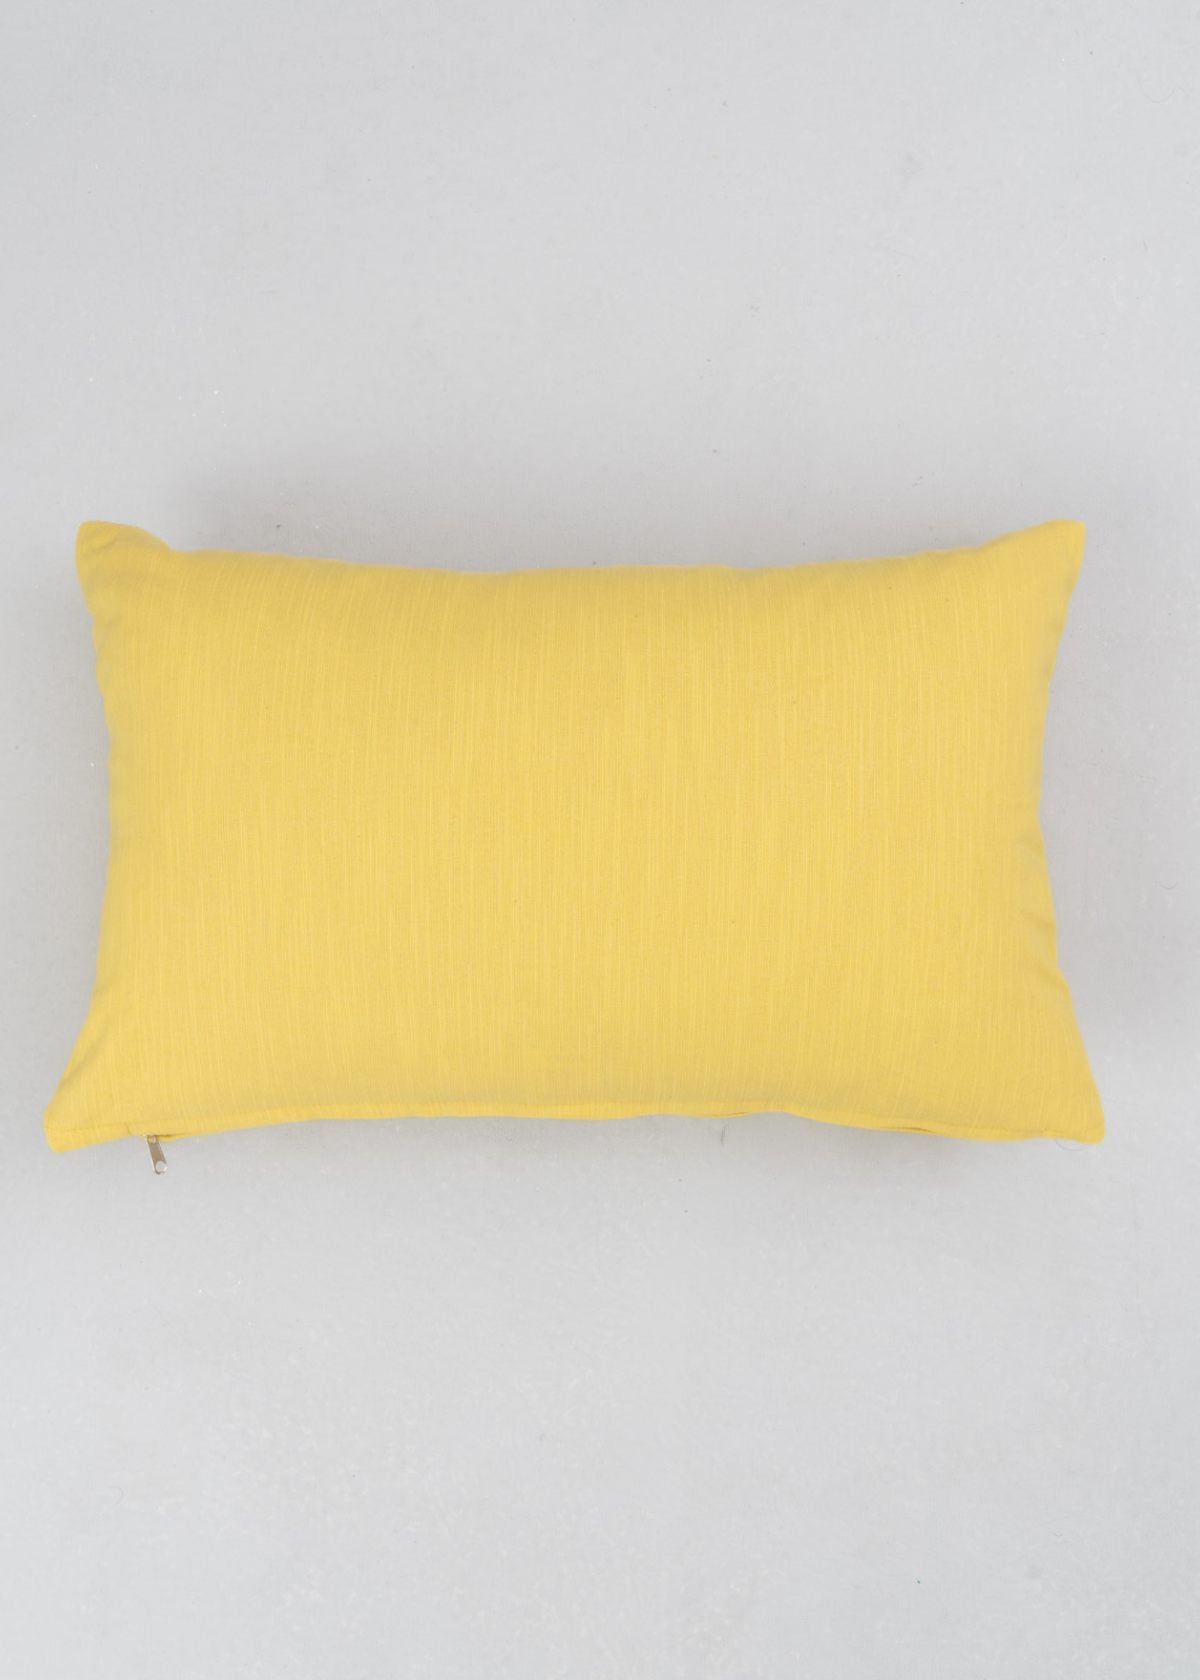 Leafy Affair Yellow Printed Cotton Cushion Cover - Yellow